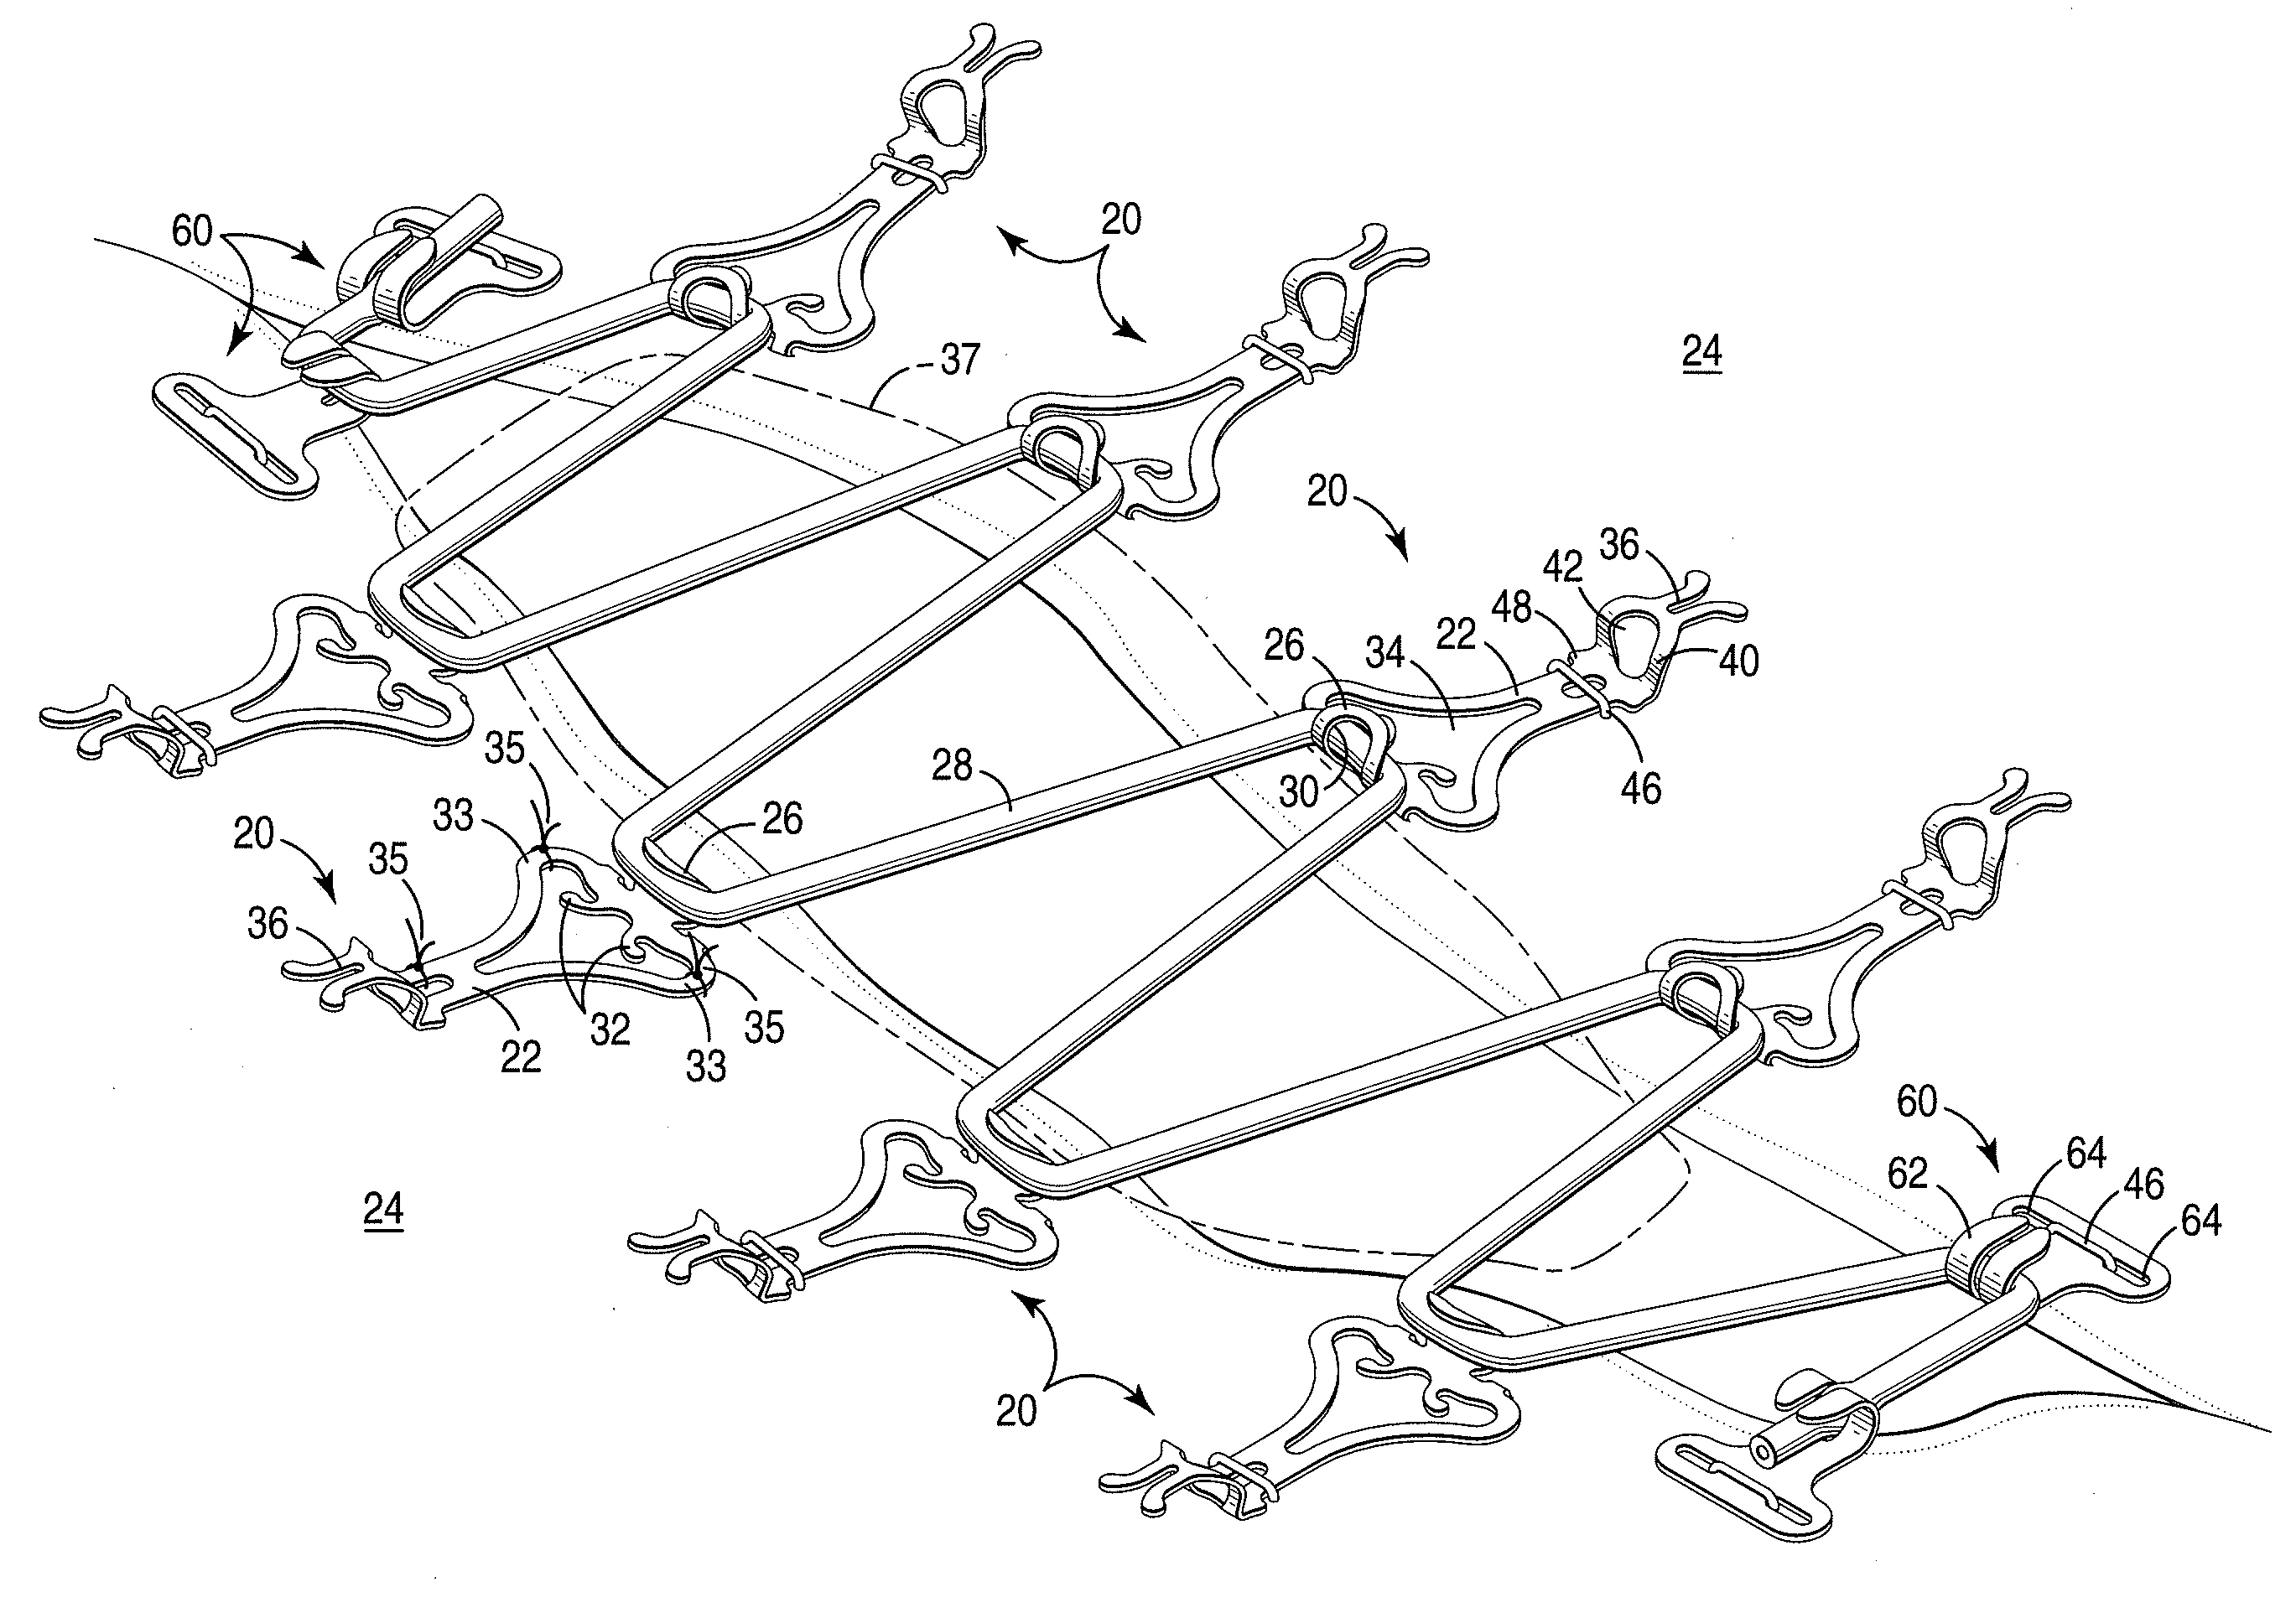 System and Method for Moving and Stretching Plastic Tissue